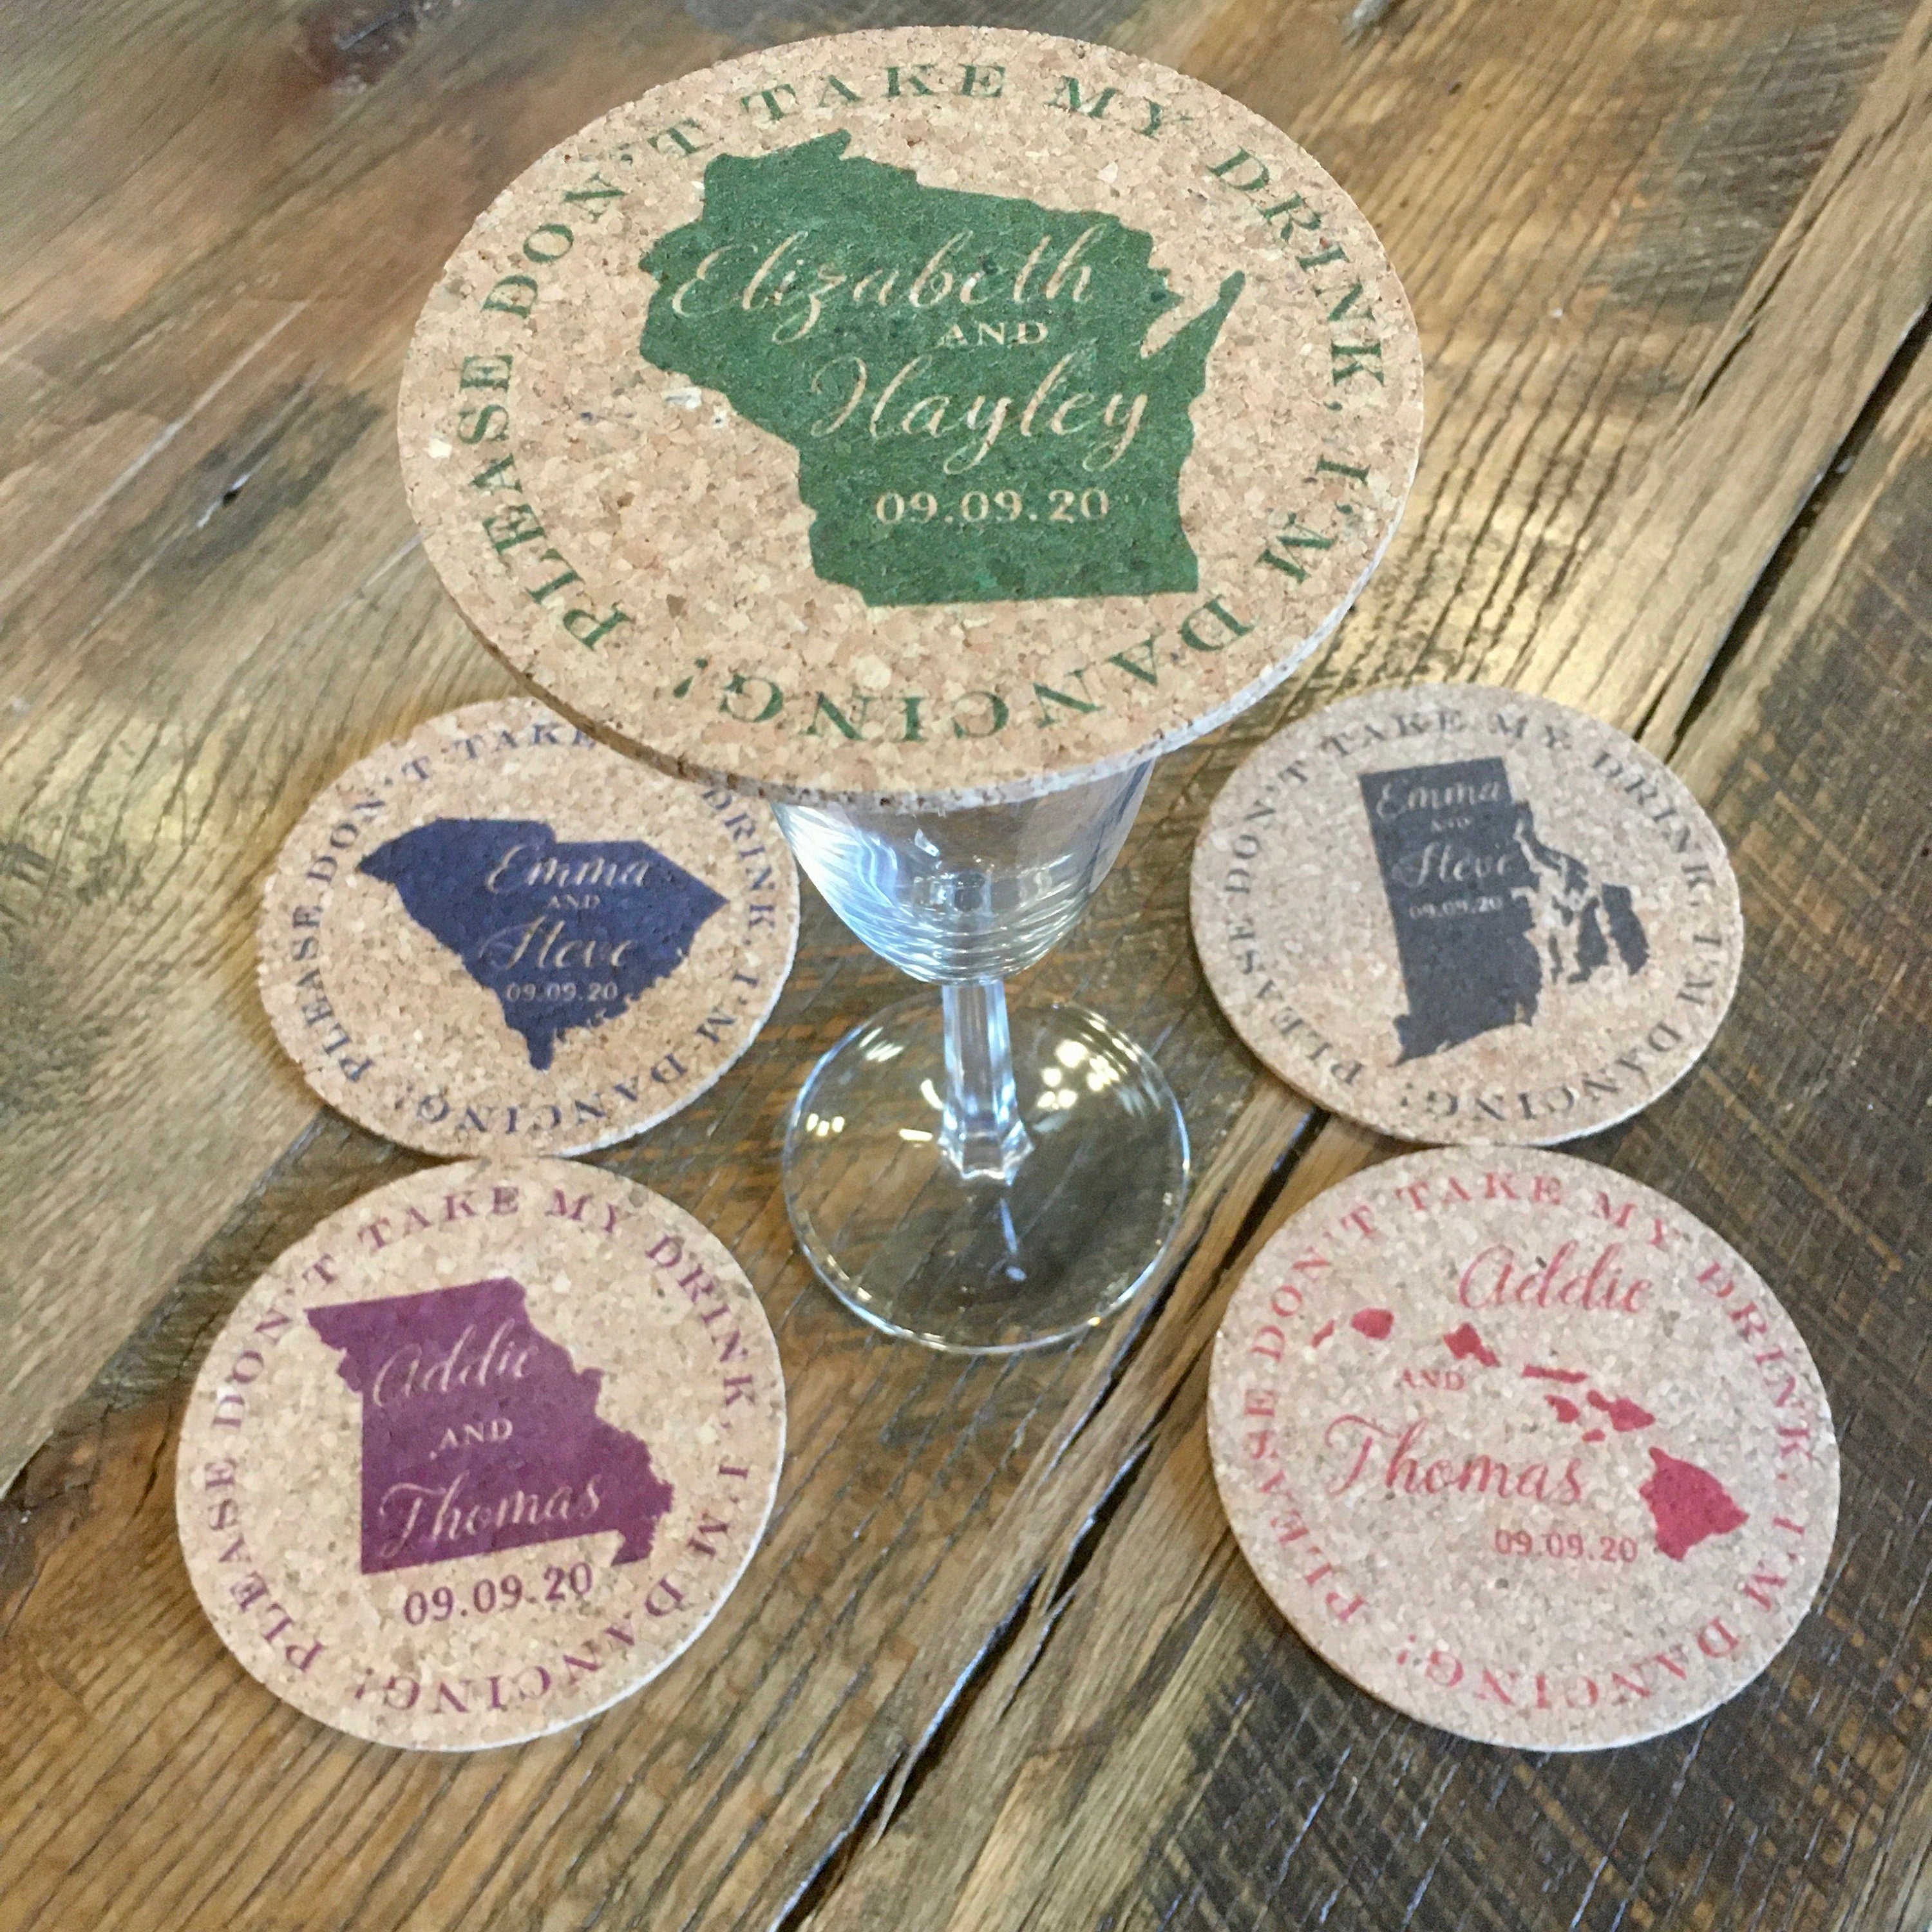 Don&#39;t Take My Drink State Cork Coaster Wedding Favors Personalized with Names and Wedding Date // Cork Coaster Wedding Favors for Guests